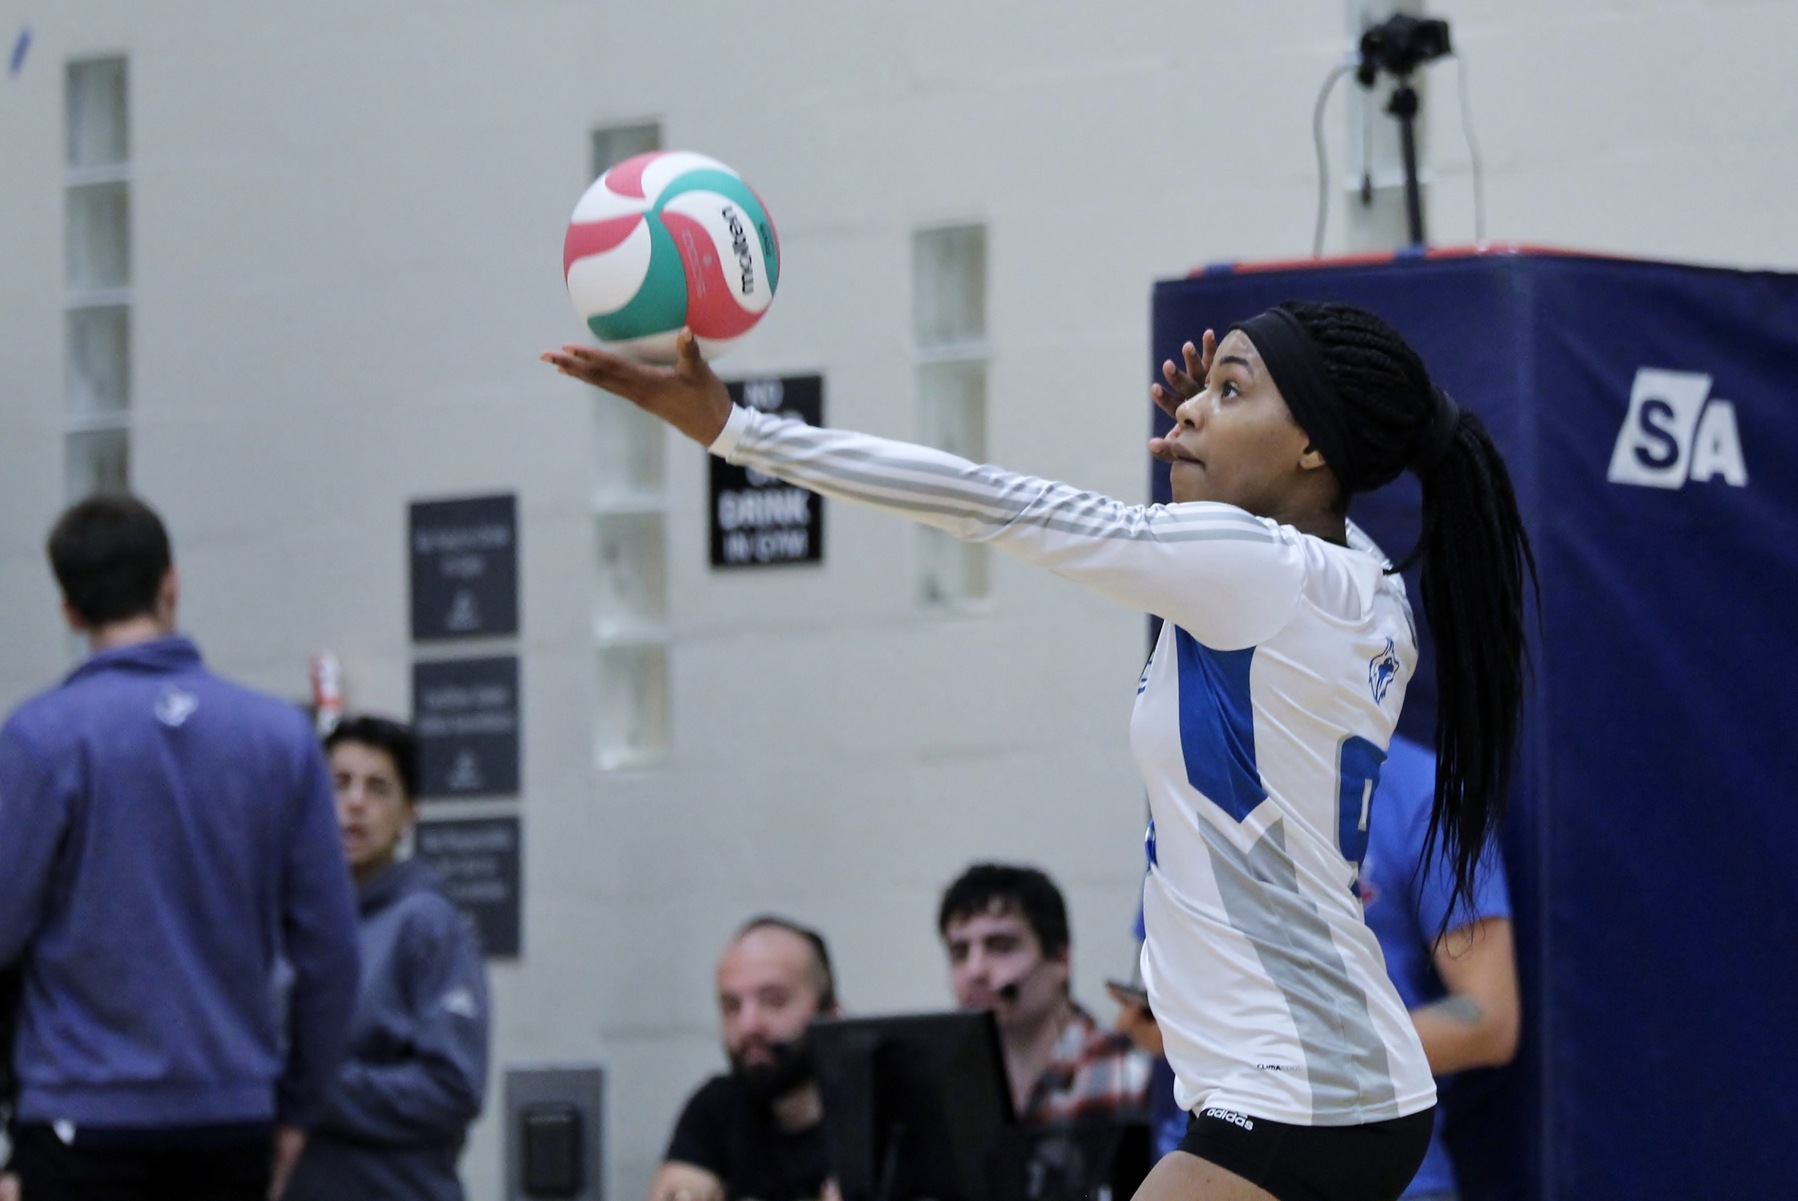 Women's volleyball player holds ball to serve